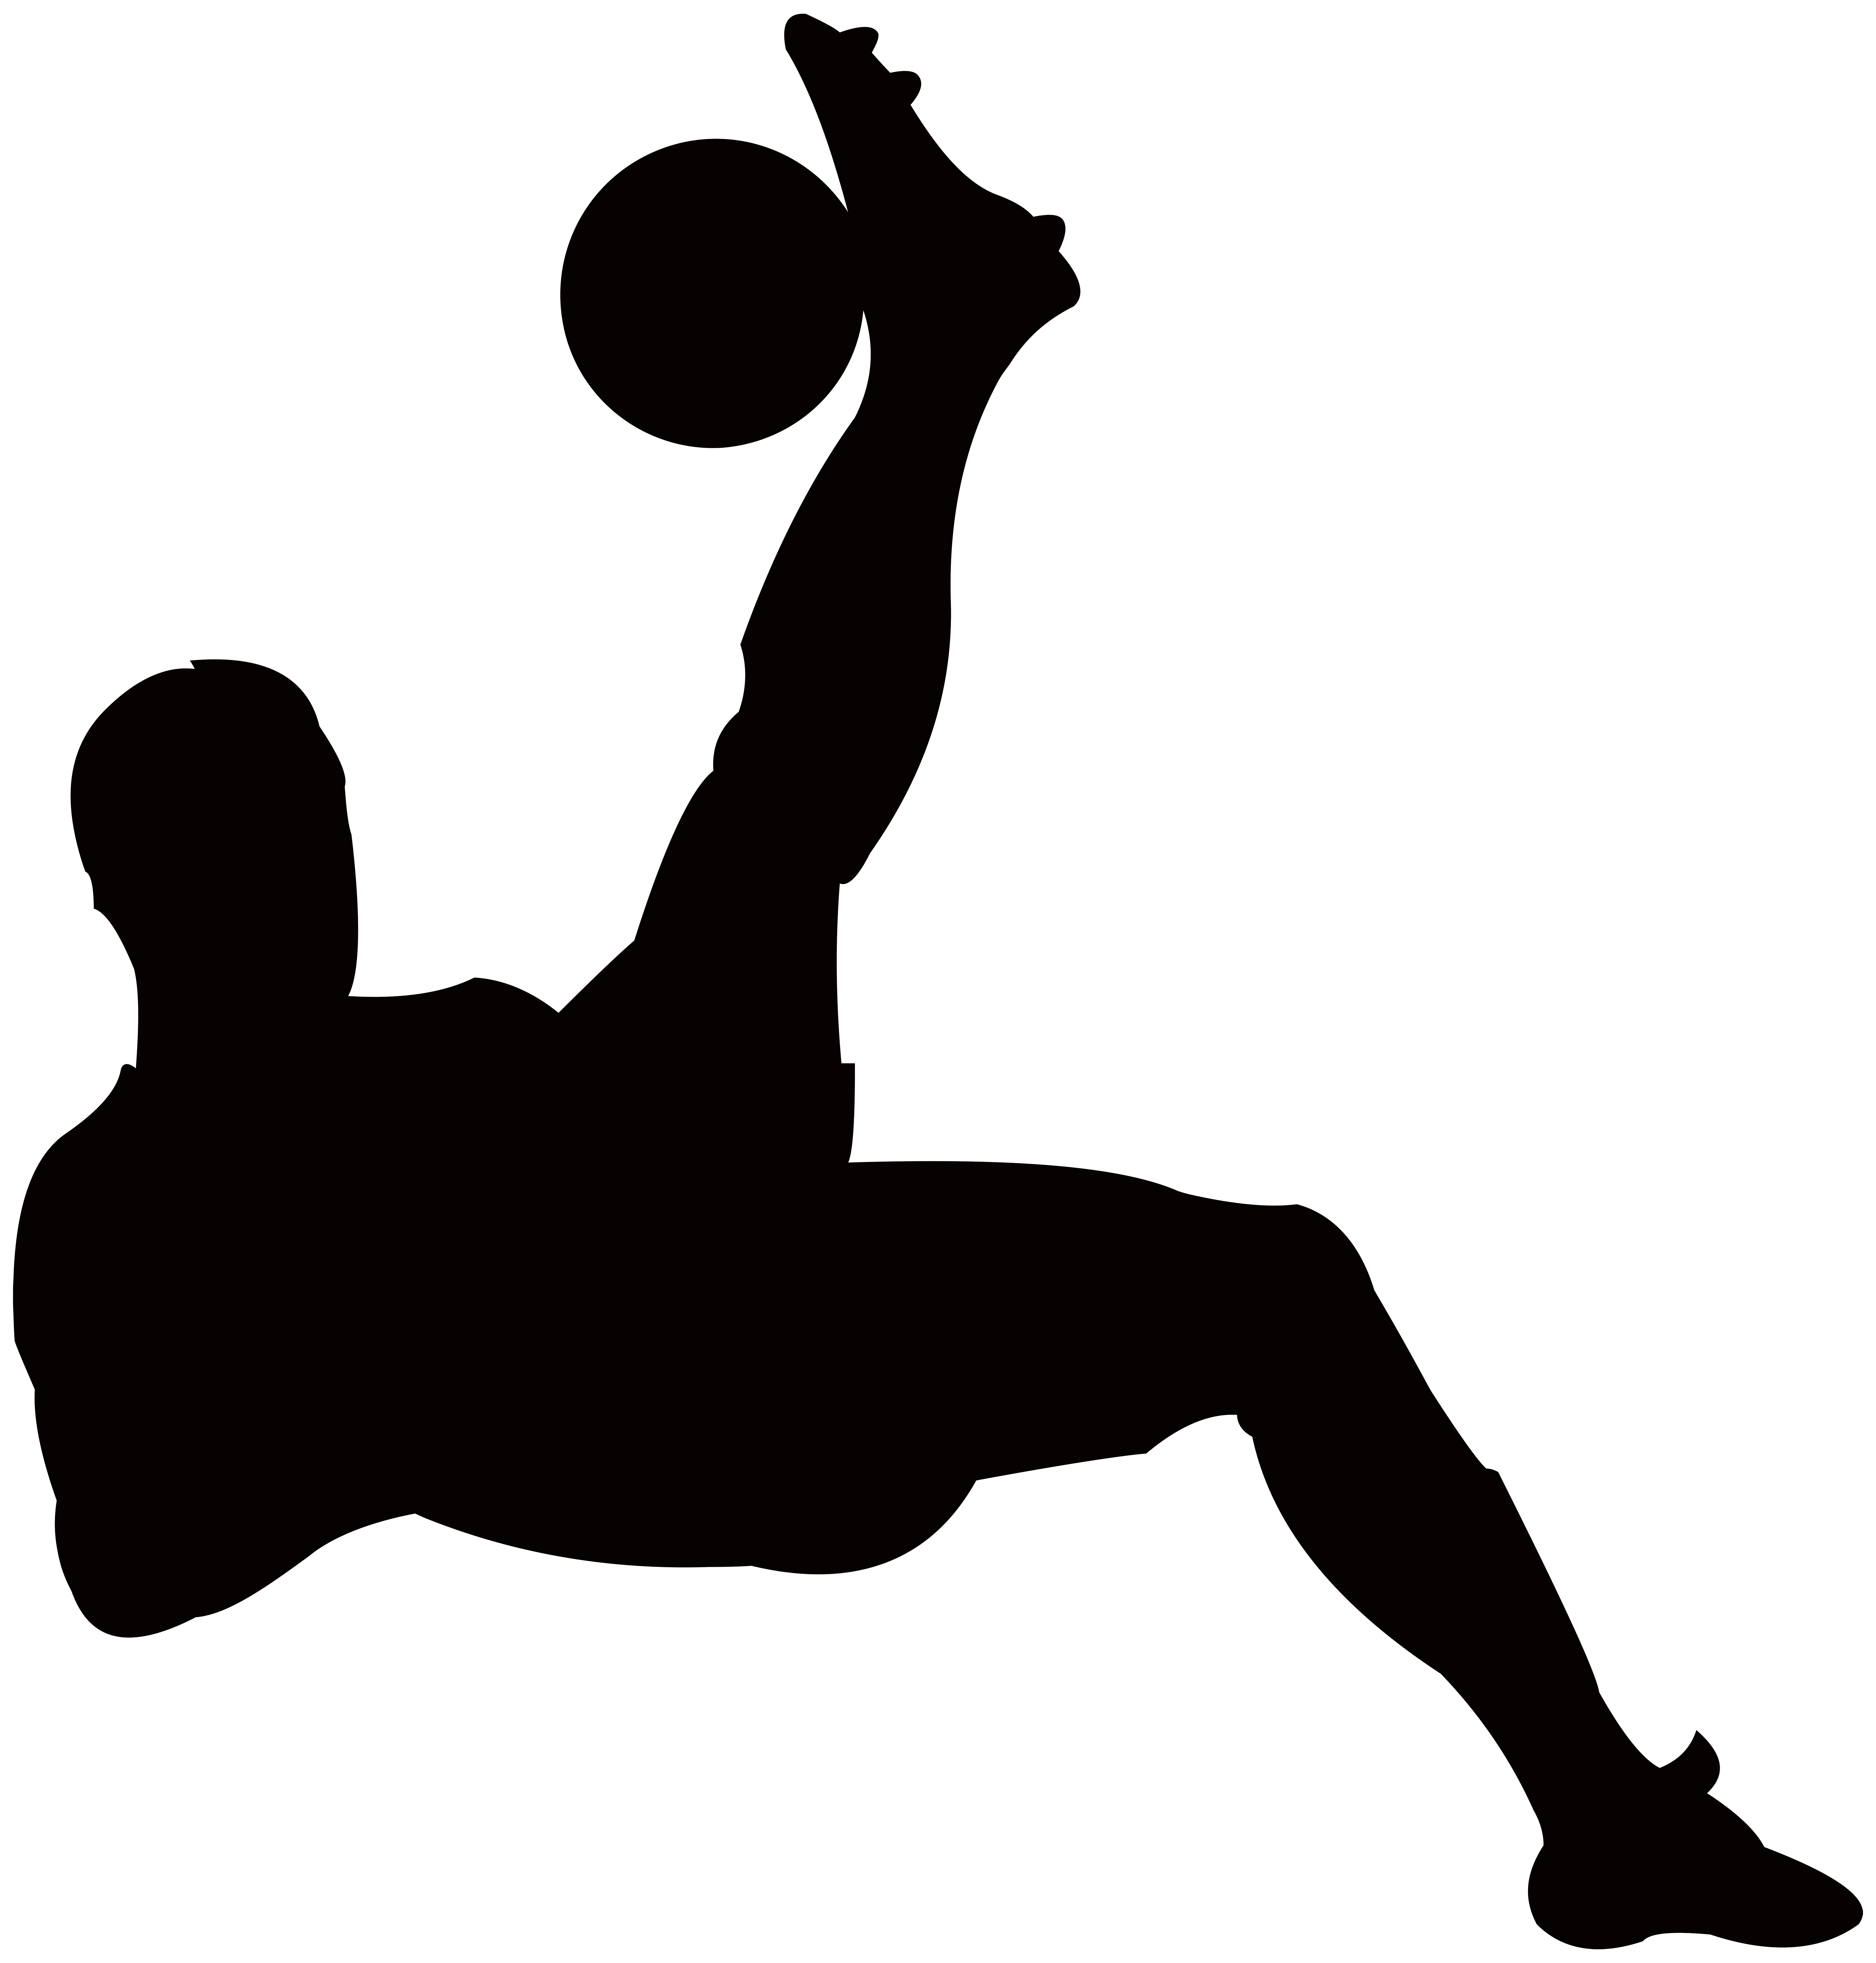 Volleyball clipart silhouette. Football player transparent png